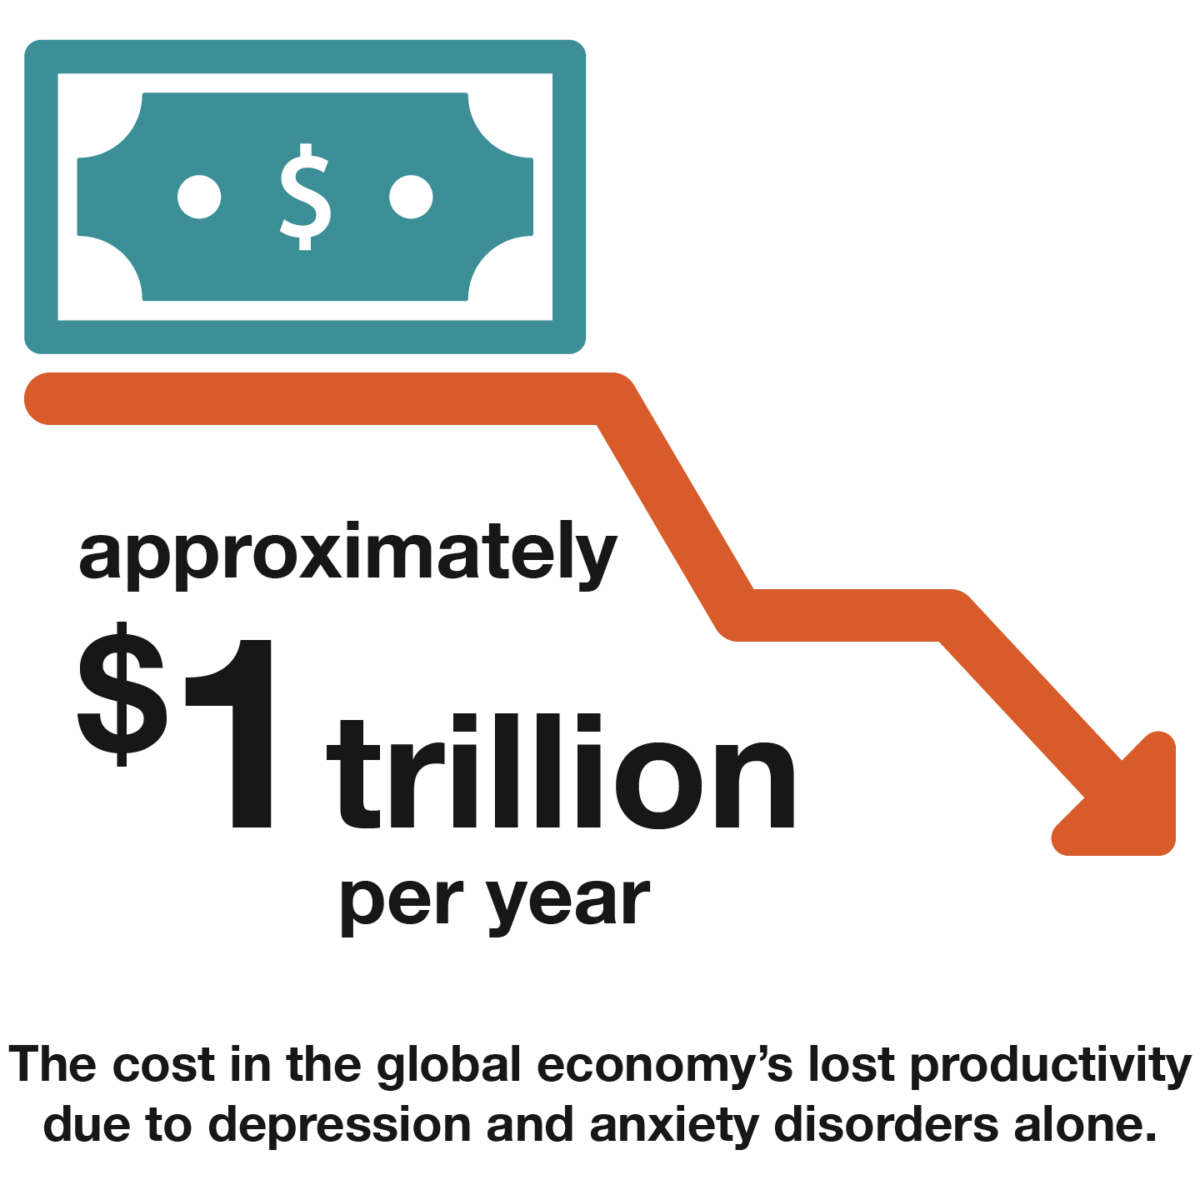 Approximately $1 trillion per year is the cost in the global economy's lost productivity due to depression and anxiety disorders along.